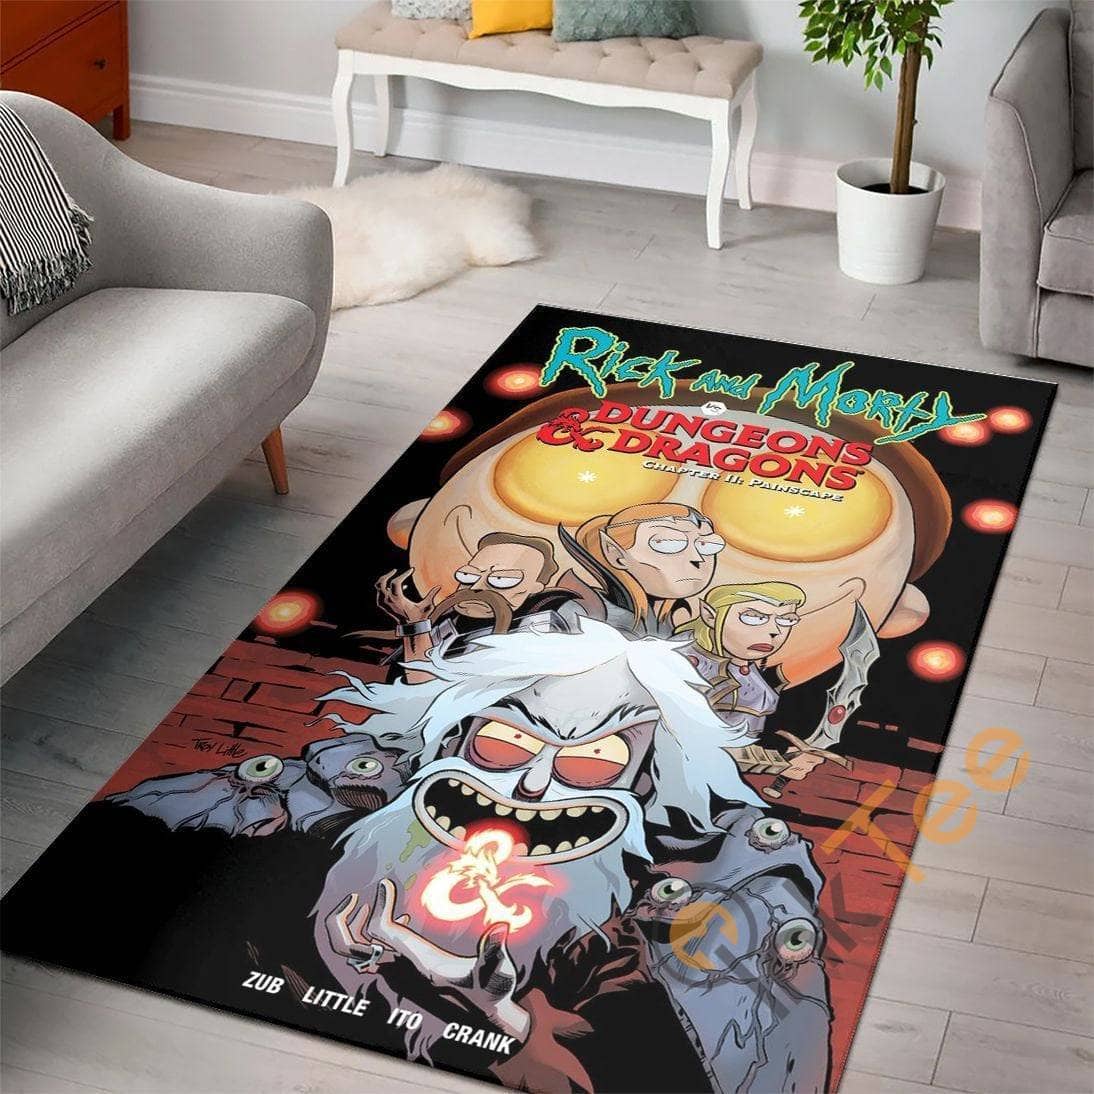 Rick And Morty Dungeons Dragons Cartoon Movies Living Room Disney Designer Inspired Christmas Rug